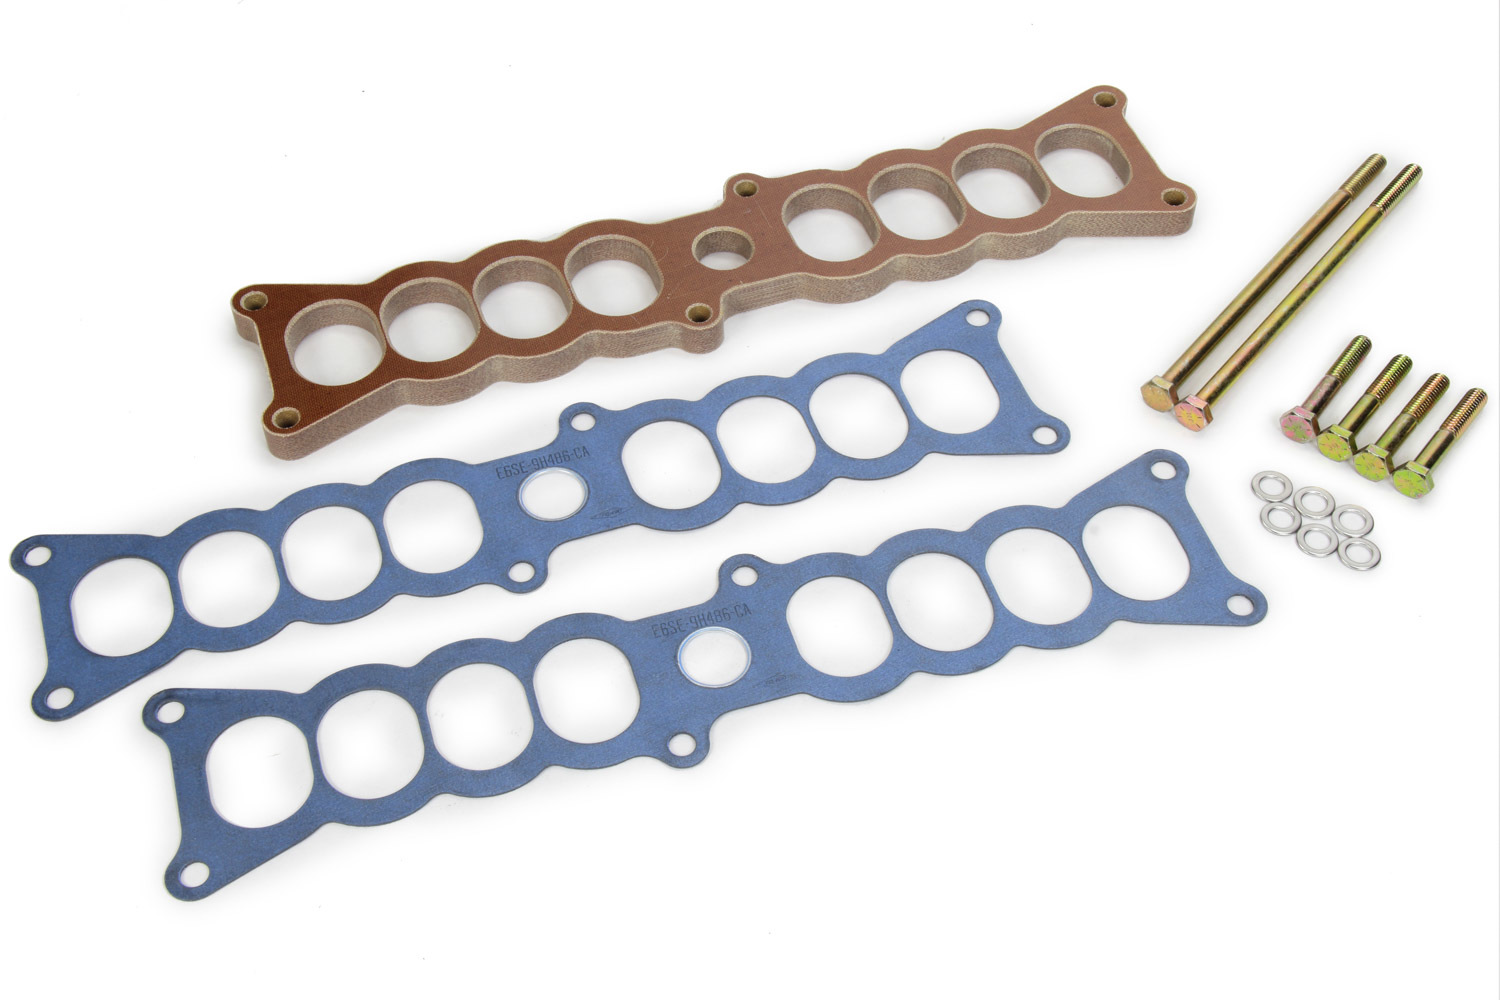 Ford Performance M9486-A51 Intake Plenum Spacer, 1/2 in Tall, Gaskets / Hardware, Phenolic, OEM Manifold, Small Block Ford, Kit